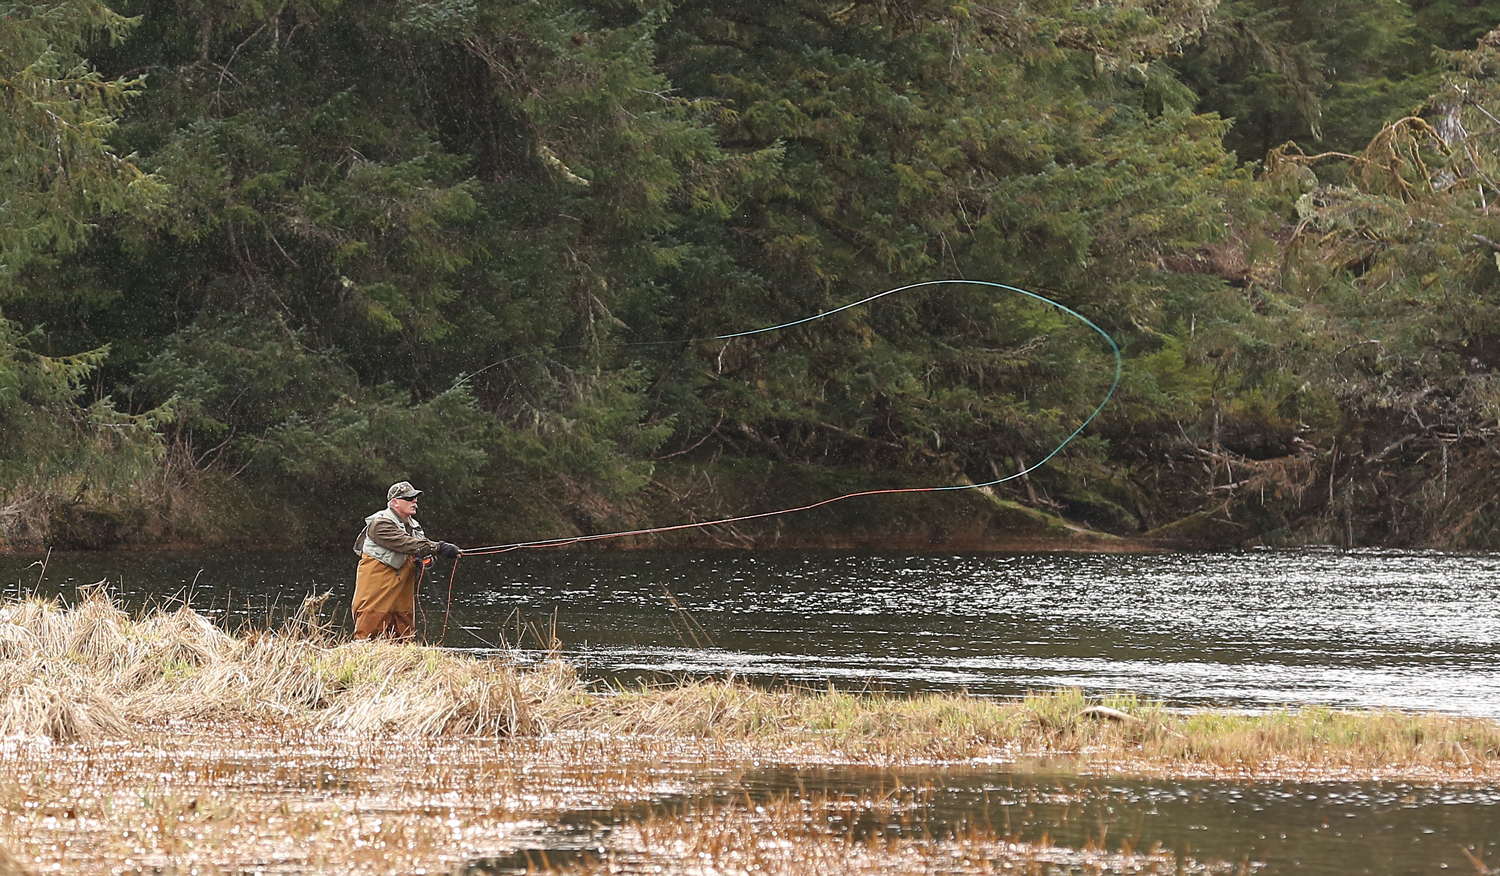 This fisherman nodded approval when I hand signaled a request to photograph him. Thank you, Fly Fisherman!